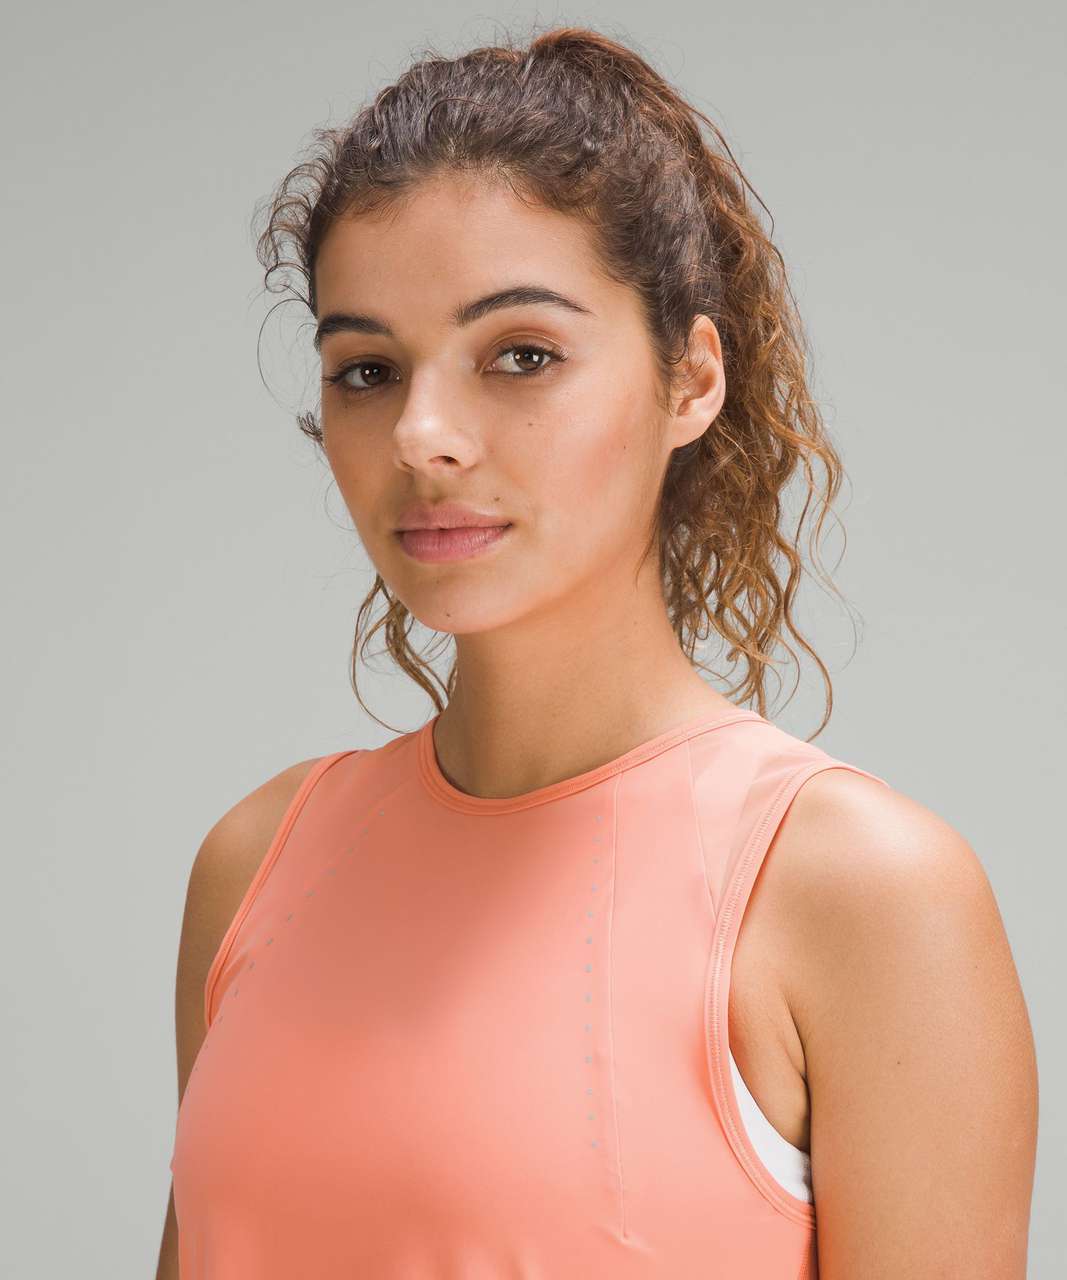 Lululemon Sculpt Cropped Tank Top - Sunny Coral